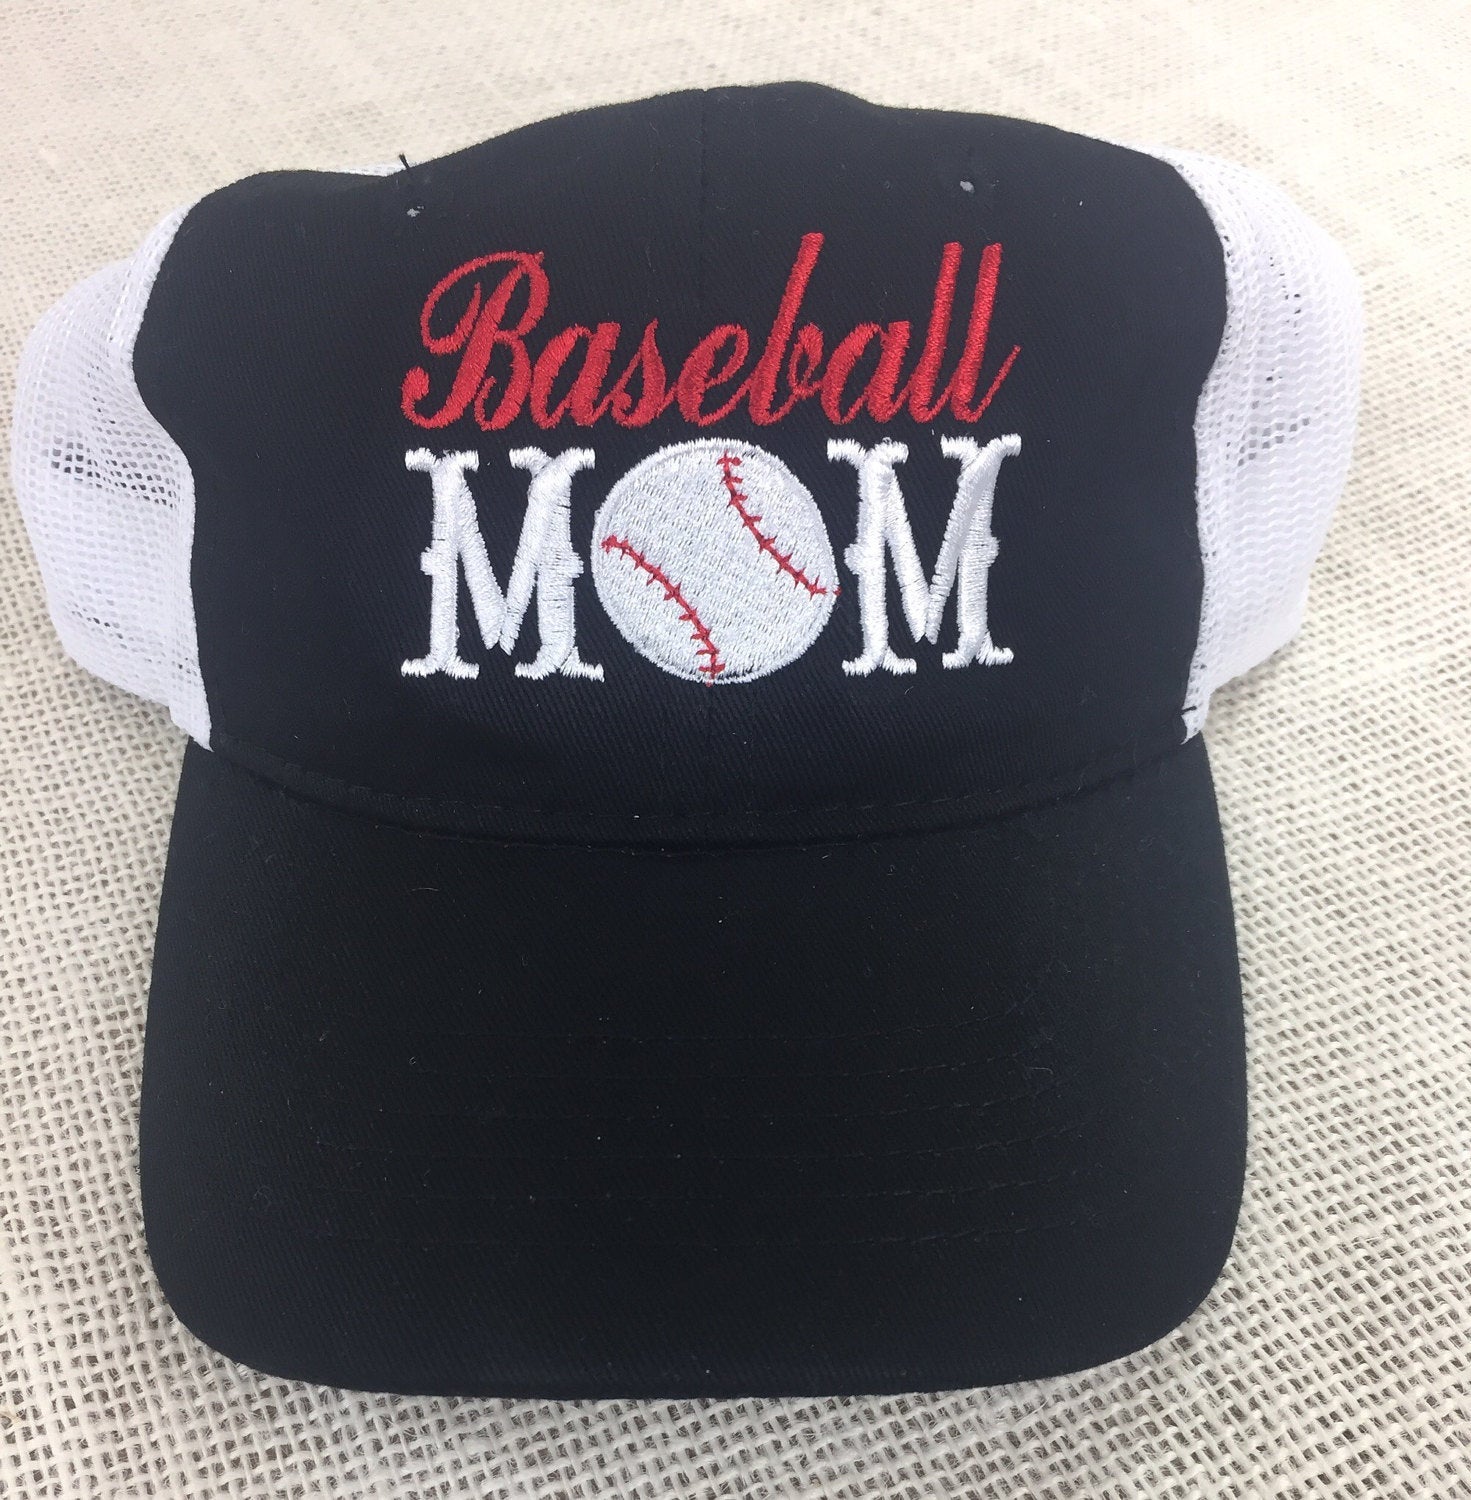 Baseball Mom trucker unstructured mesh hat theead color 100% customizable